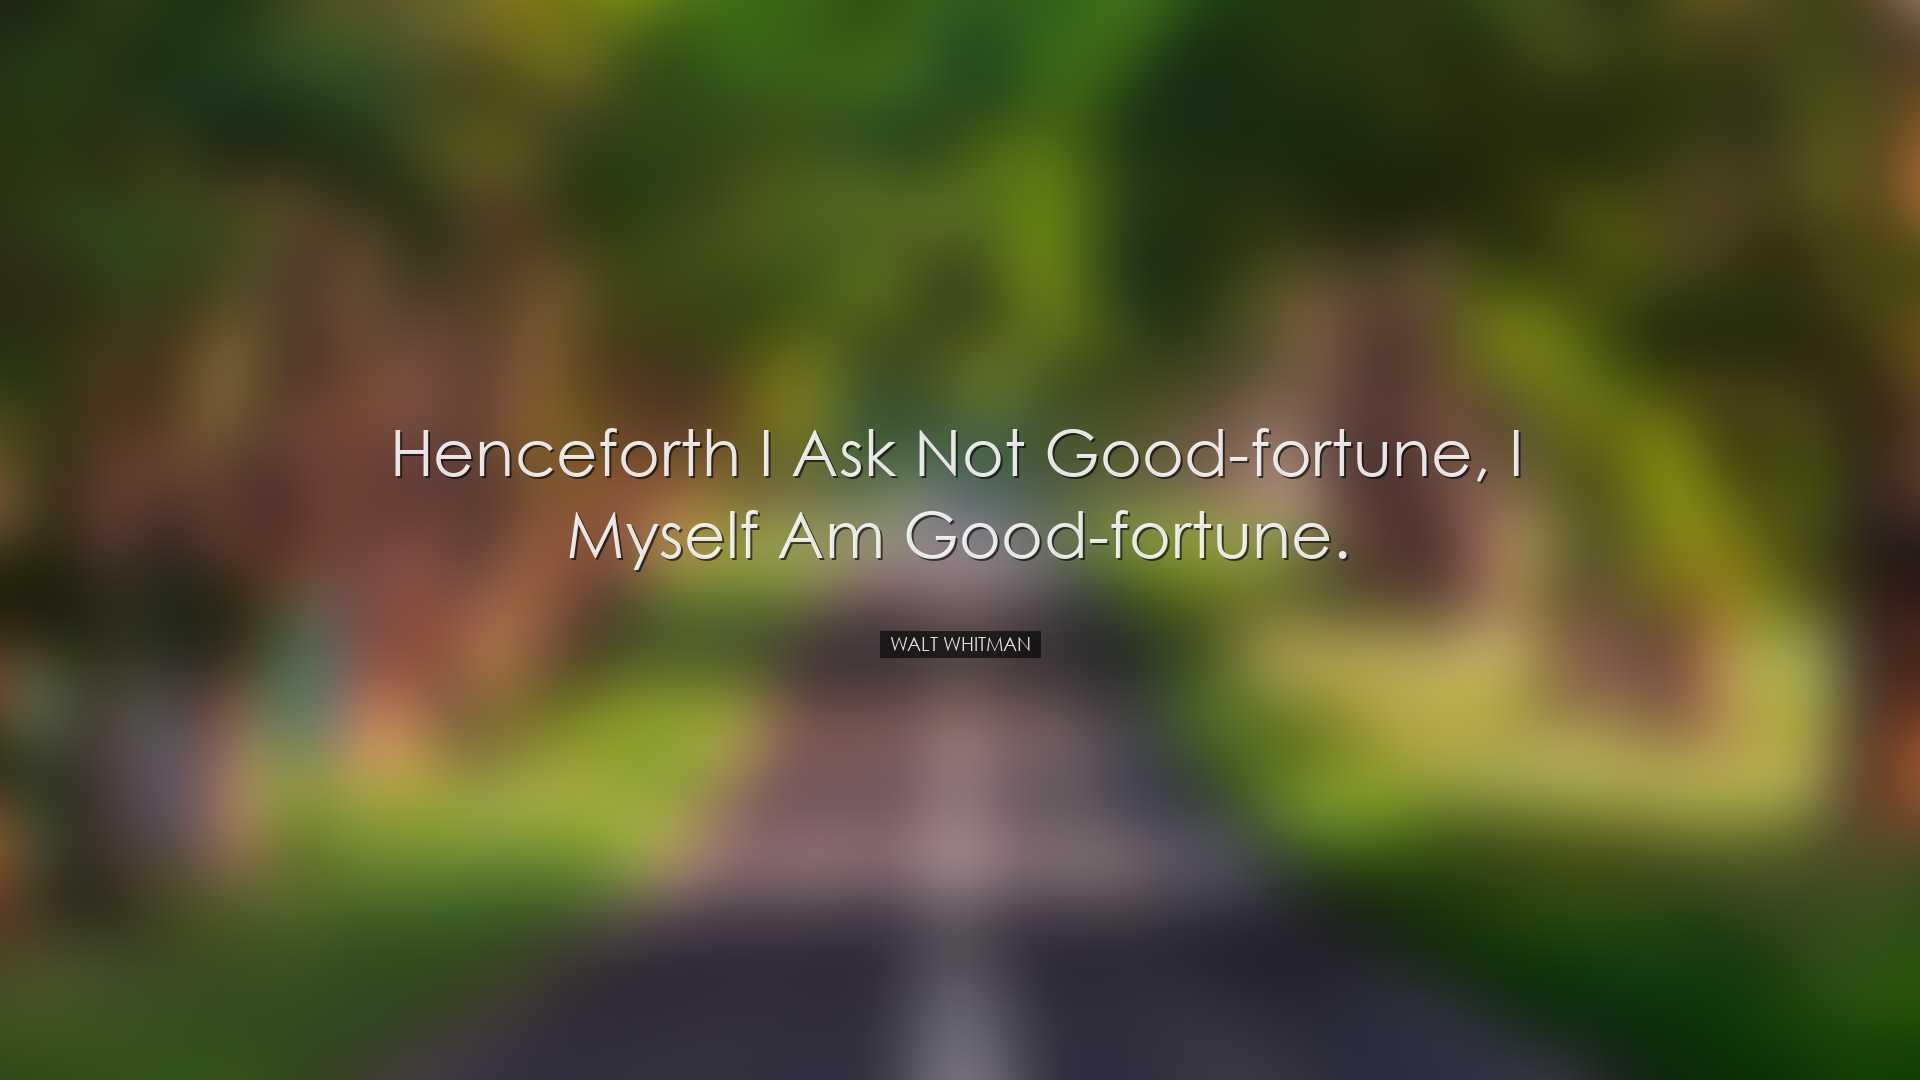 Henceforth I ask not good-fortune, I myself am good-fortune. - Wal